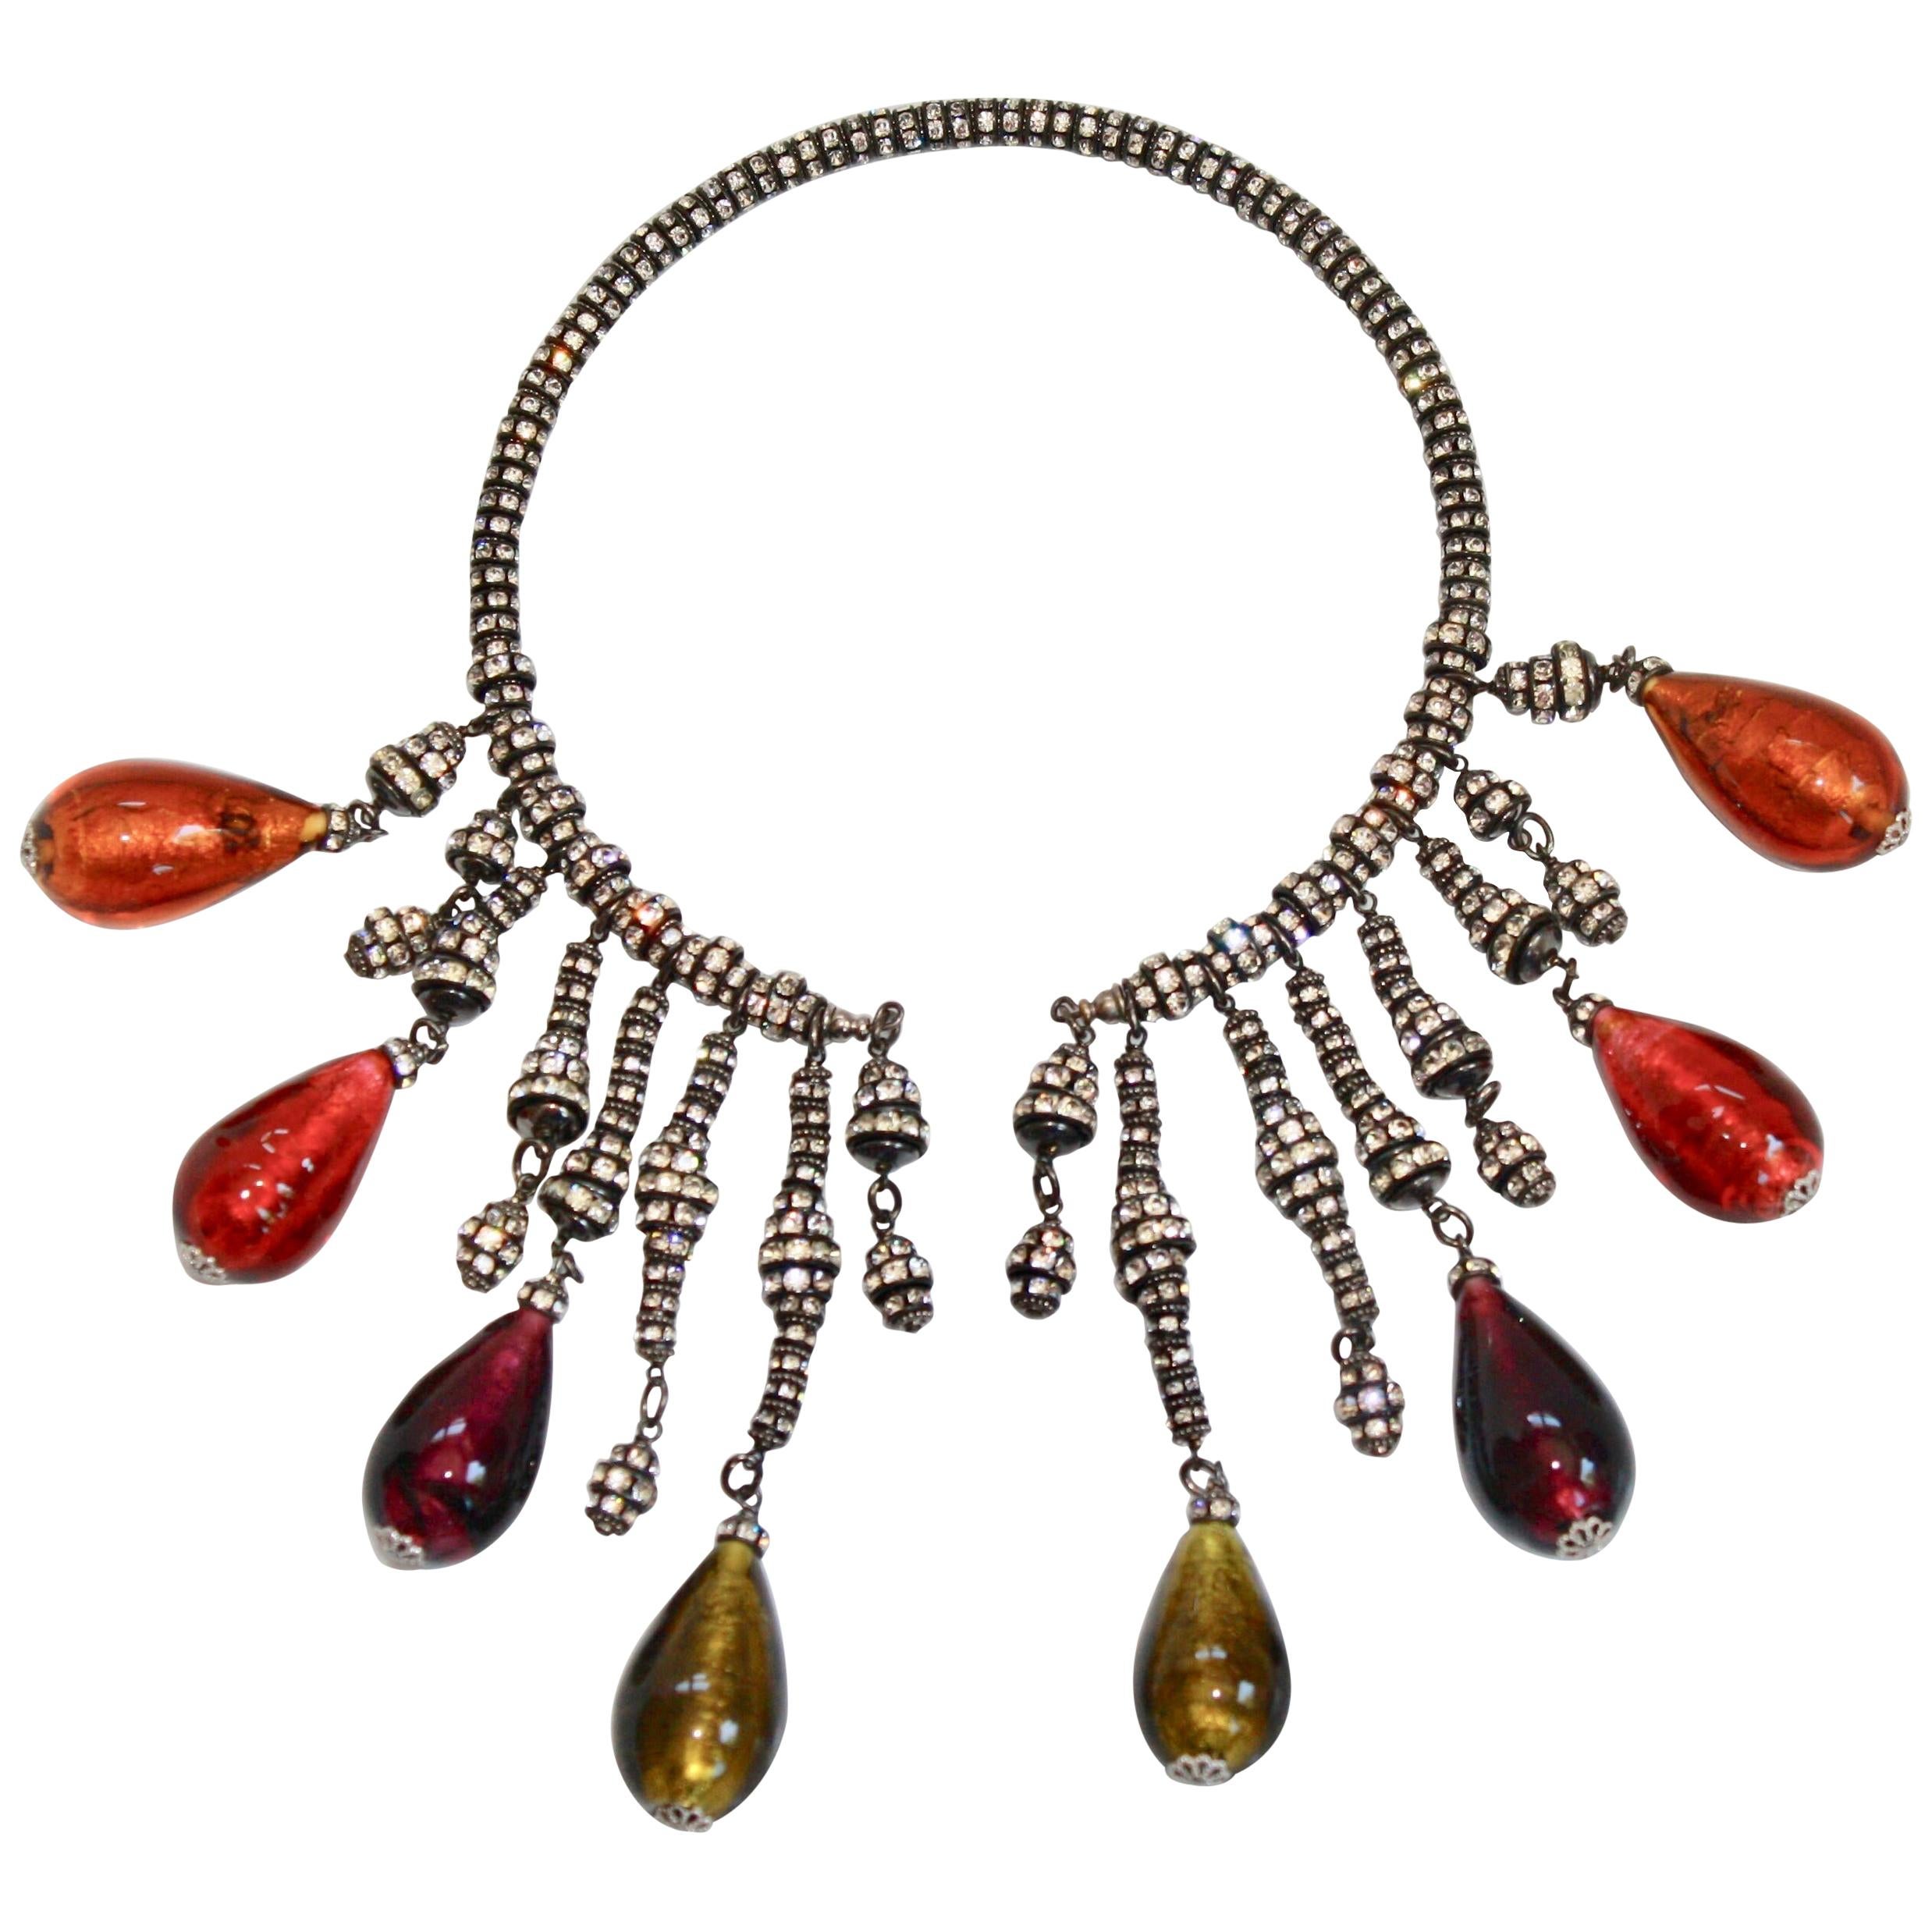 Francoise Montague Venetian Glass and Swarovski Crystal Graduated Necklace